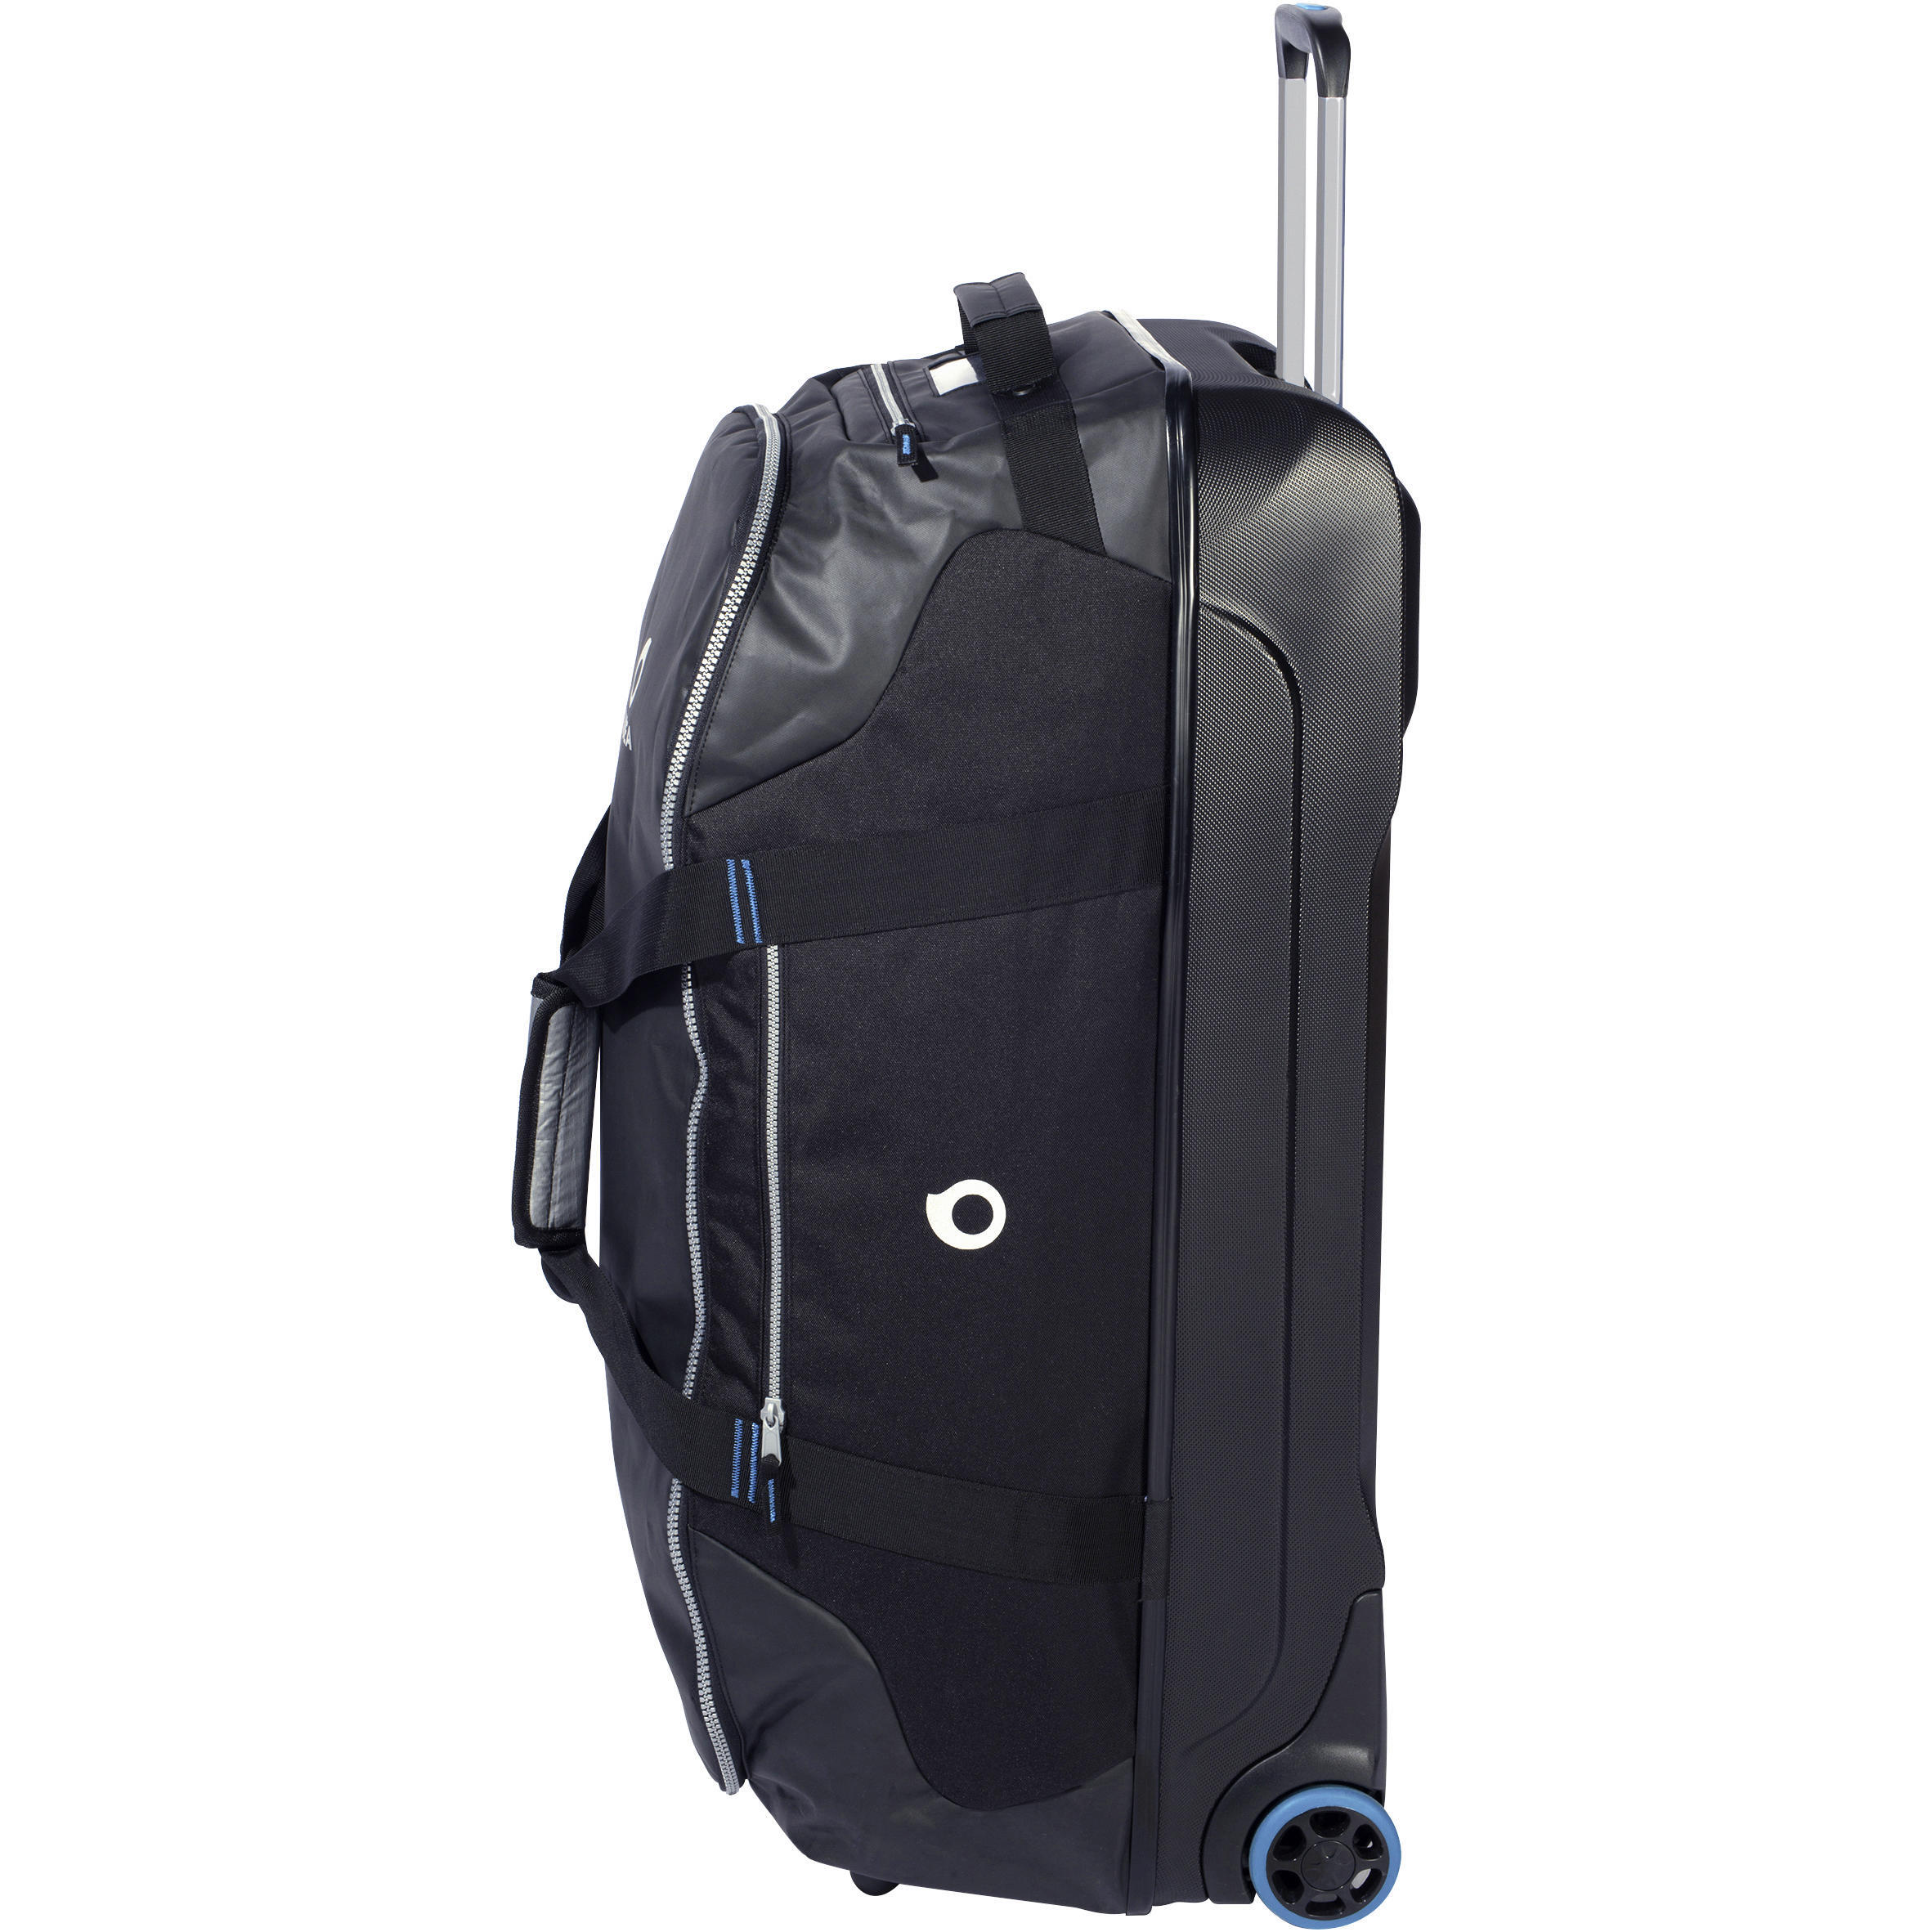 Scuba-diving travel bag 90 L with rigid shell and wheels - black/blue 7/21